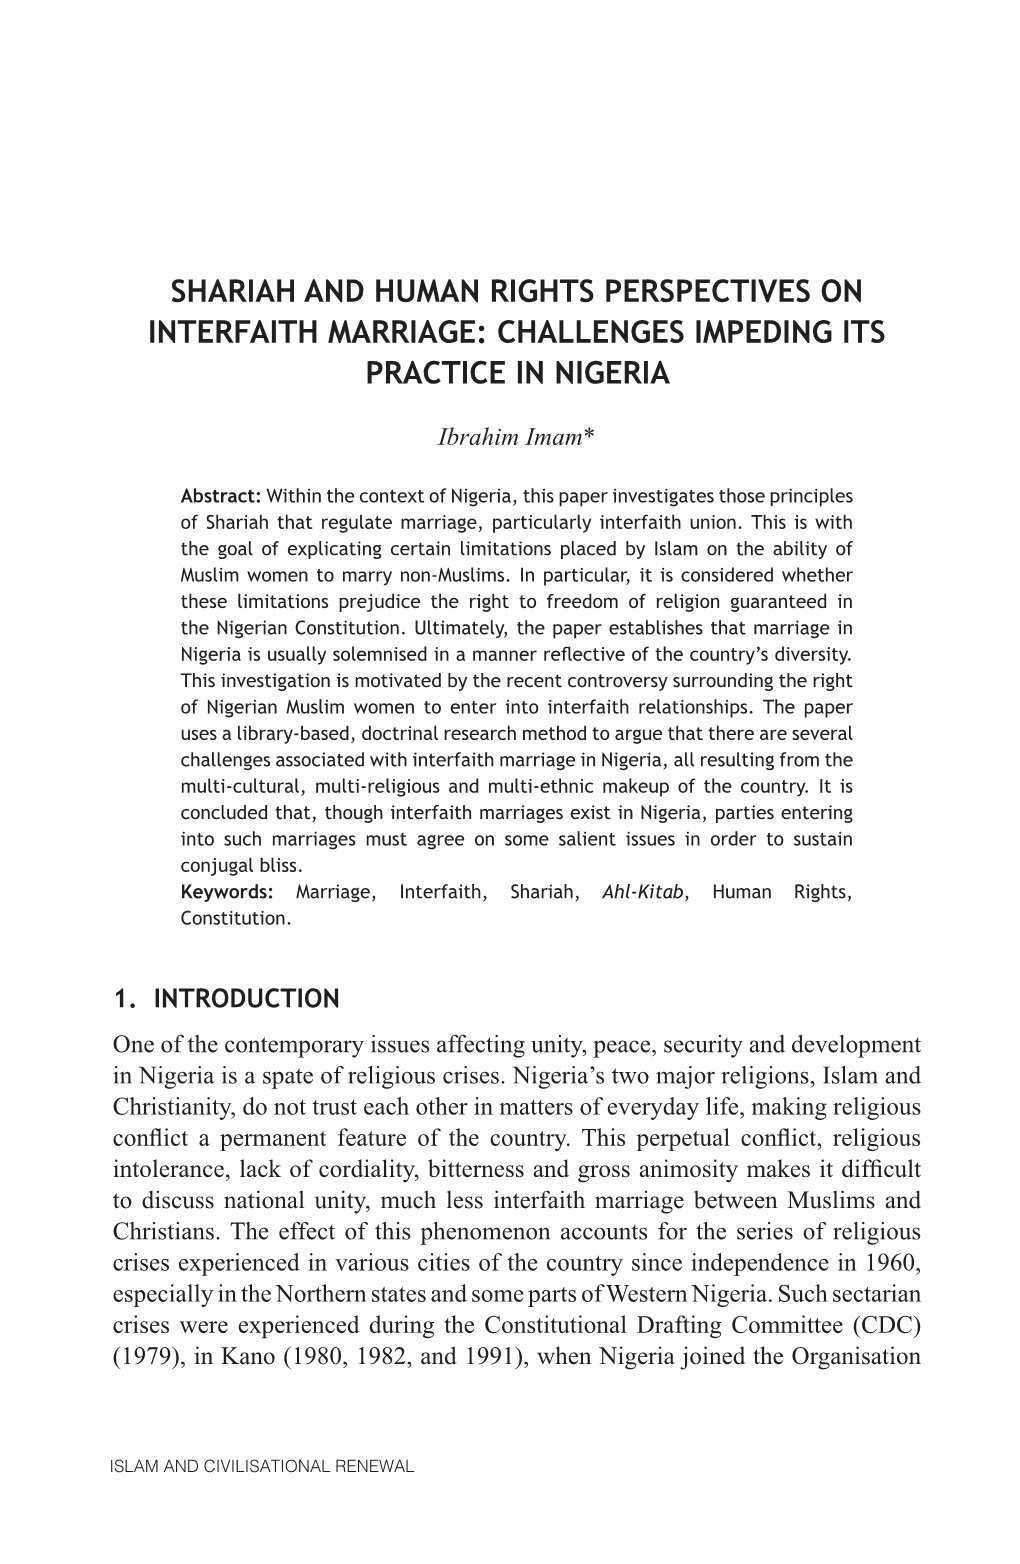 Shariah and Human Rights Perspectives on Interfaith Marriage: Challenges Impeding Its Practice in Nigeria